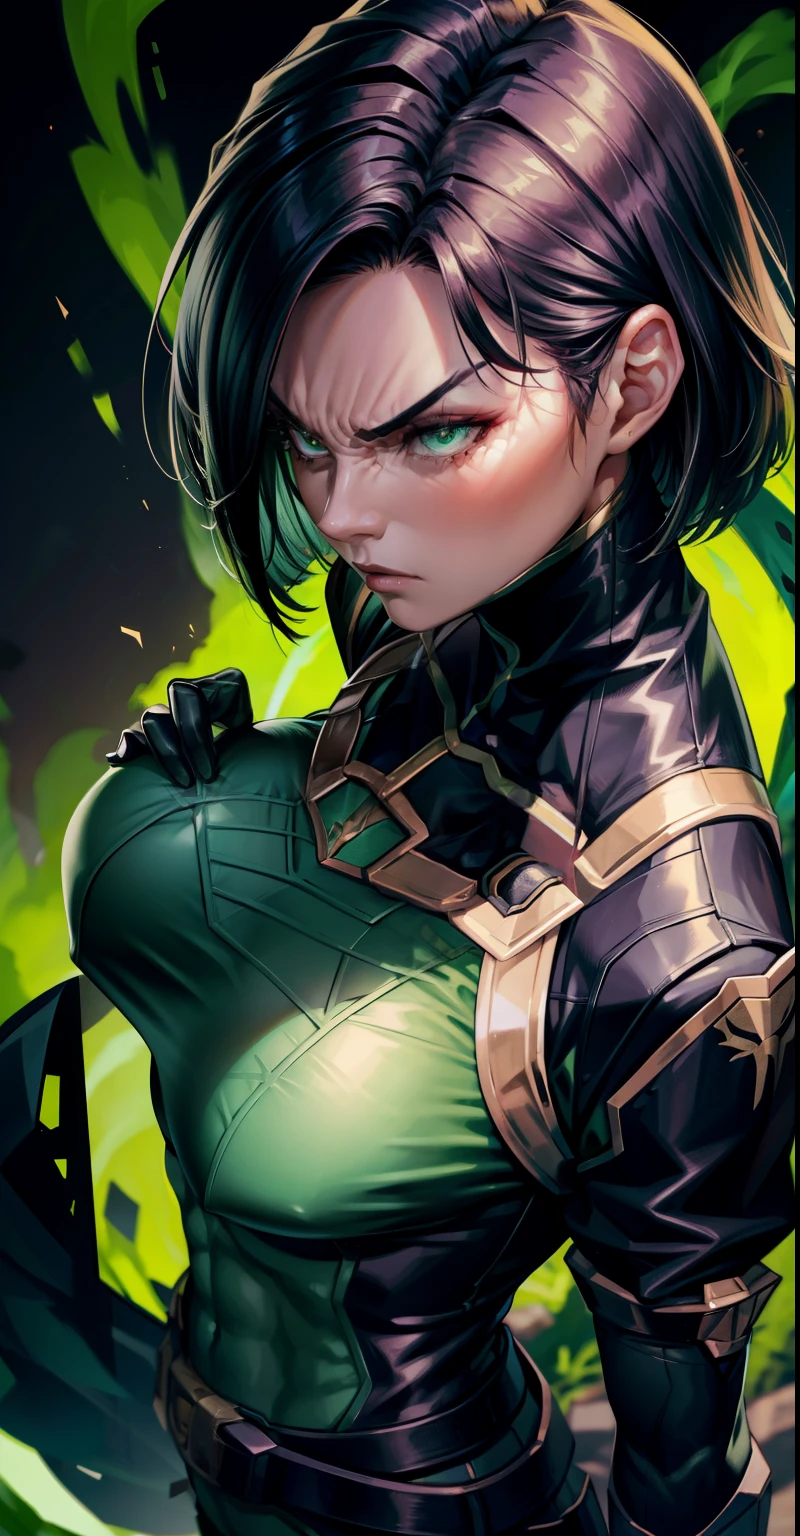 Masterpiece, Best quality,looking from above，《Fearless viper》, Bikini, mitts, belt, thigh boots, respirator, view the viewer, face, Portrait, Close-up, Glowing eyes, green smoke, Black background,huge tit，Raised chest，Bare-bodied，Close-up of chest，angry look，Devil figure，Staring angrily at the screen，Facing the screen，Muscle woman，abs，naked belly